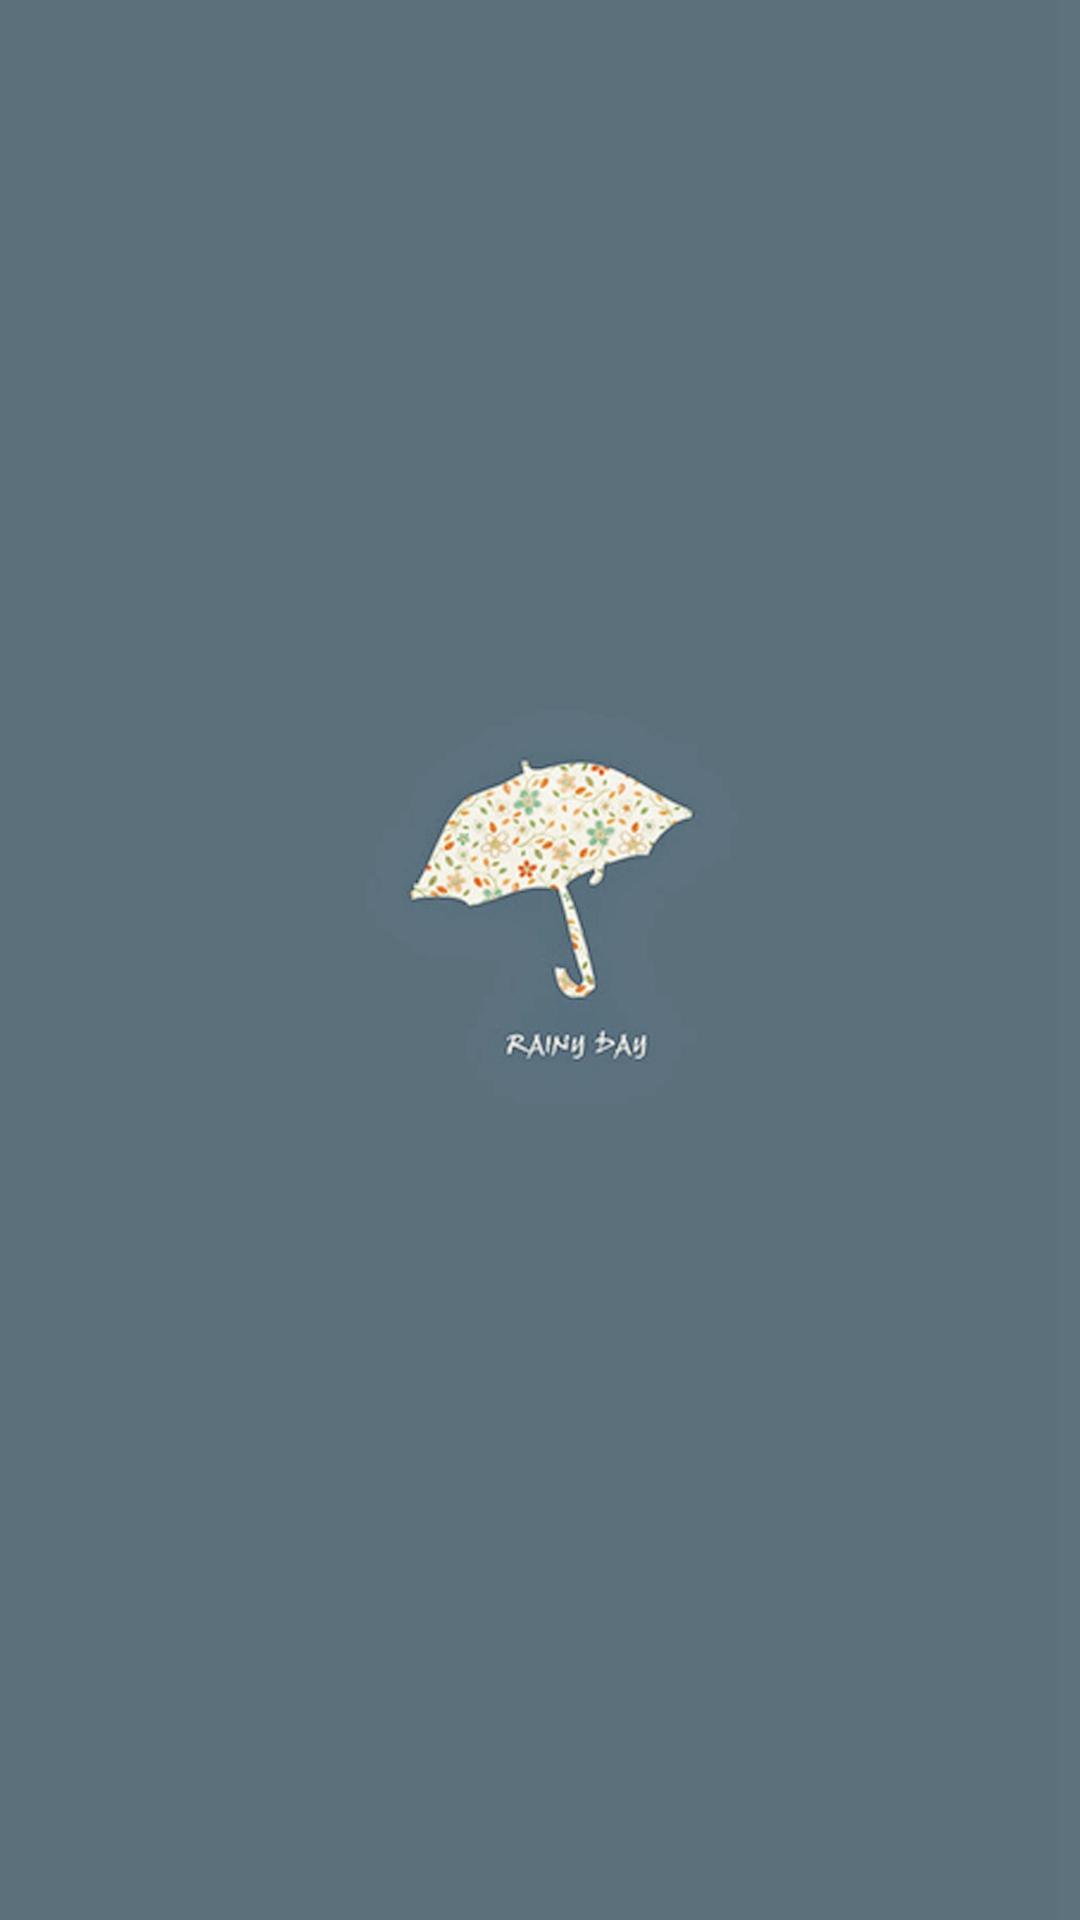 Rainy Day Simple Minimal iPhone 8 Wallpaper Free Download